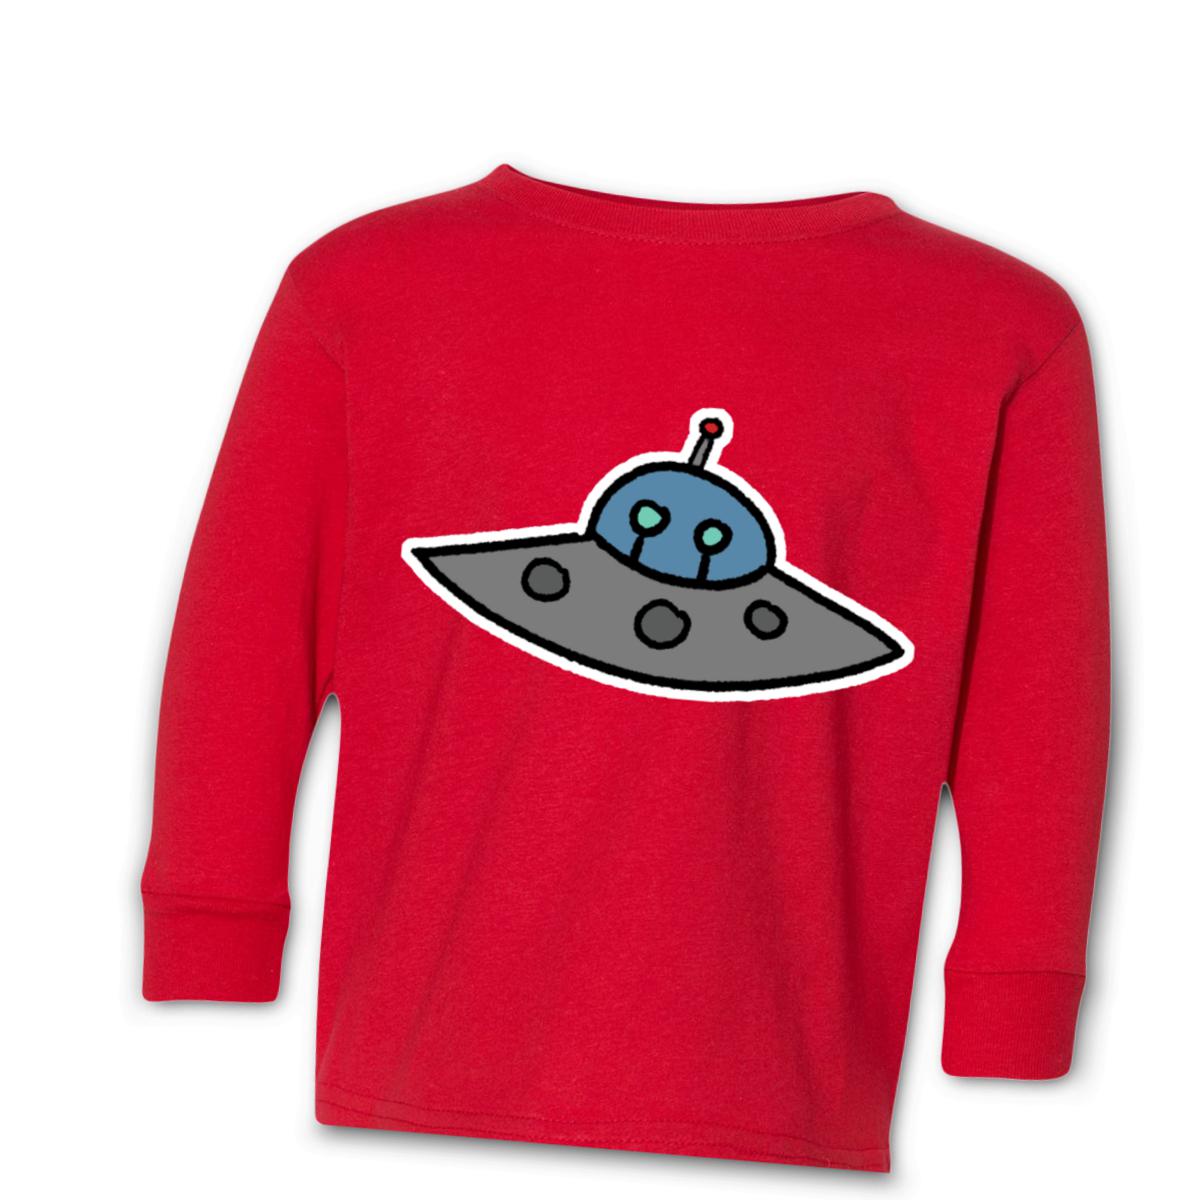 Flying Saucer Kid's Long Sleeve Tee Small red